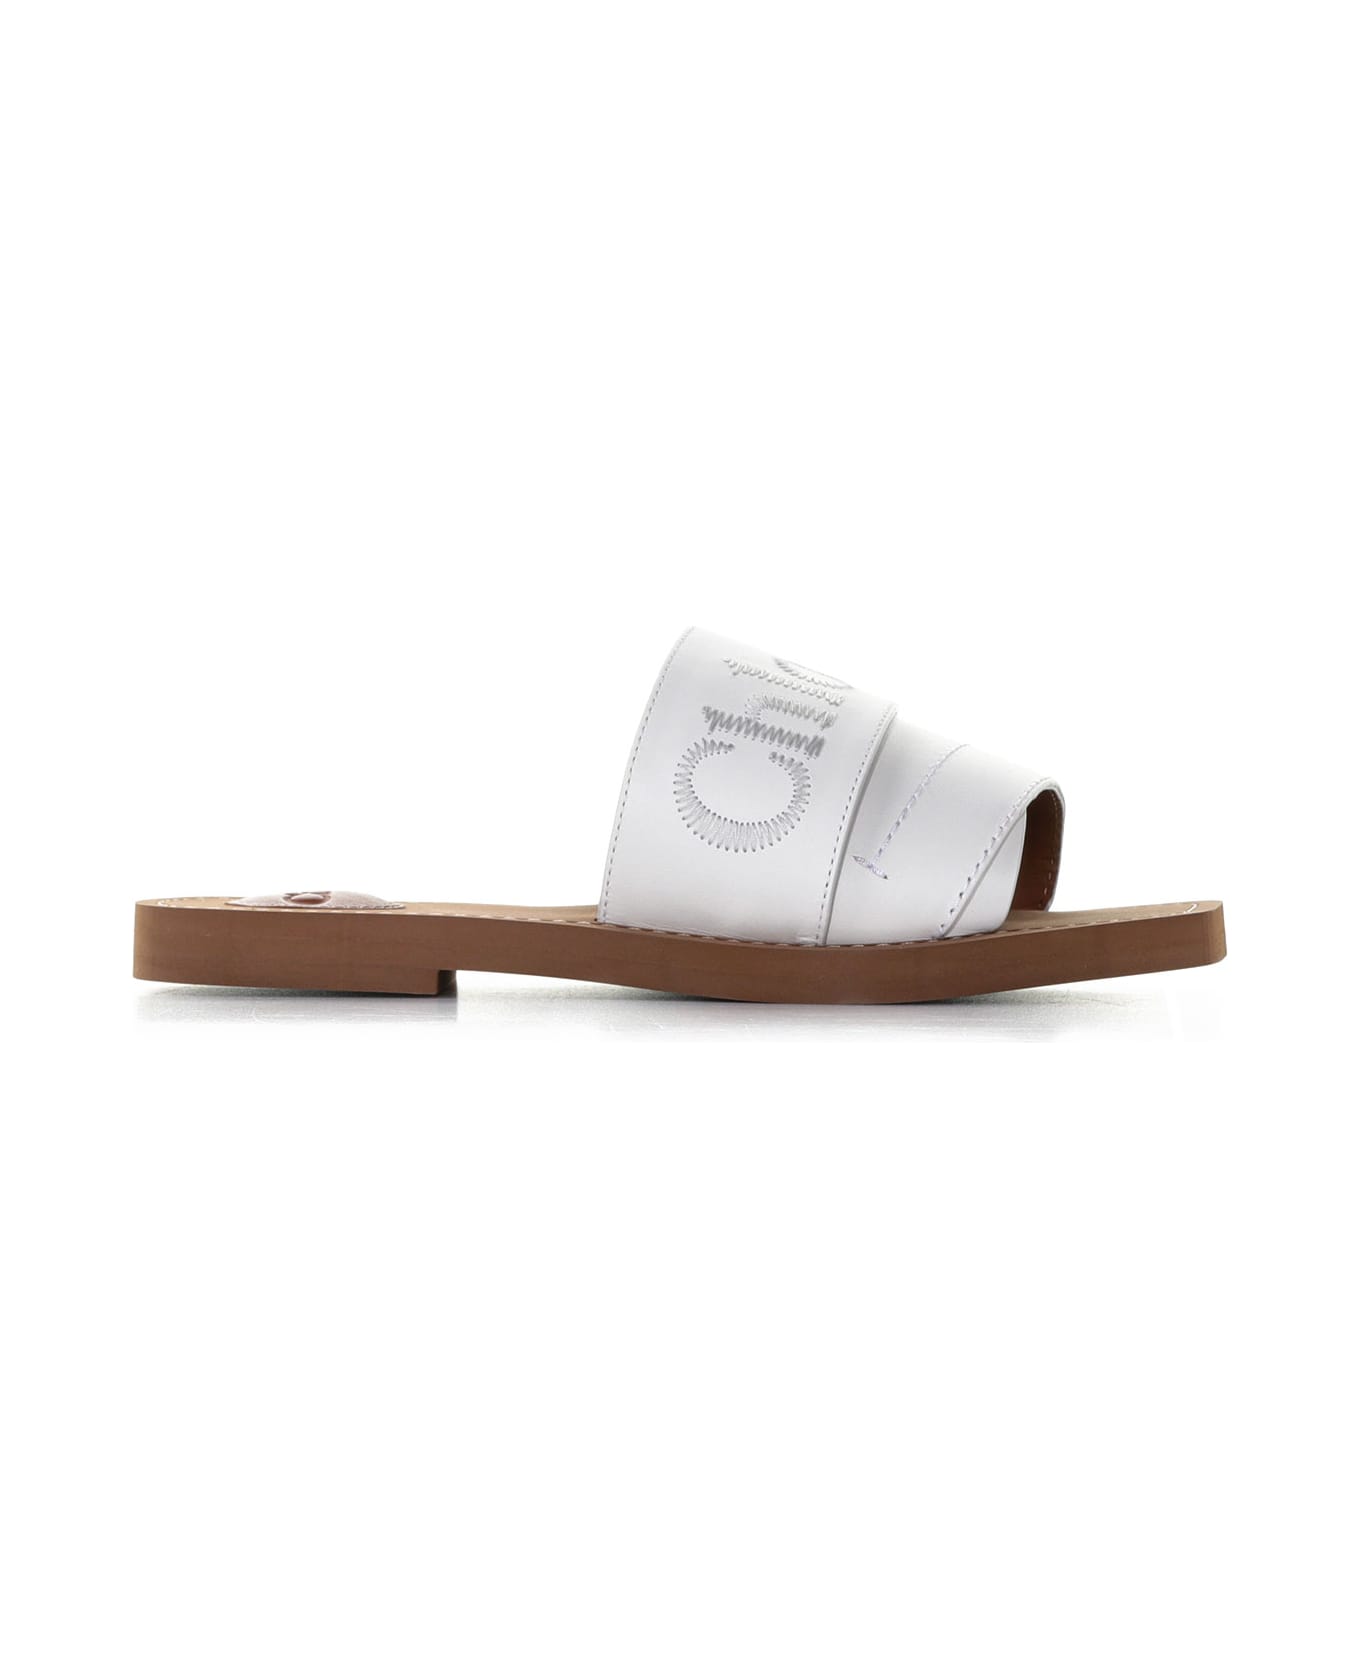 Chloé Woody Smooth Leather Slide Sandals - WHITE